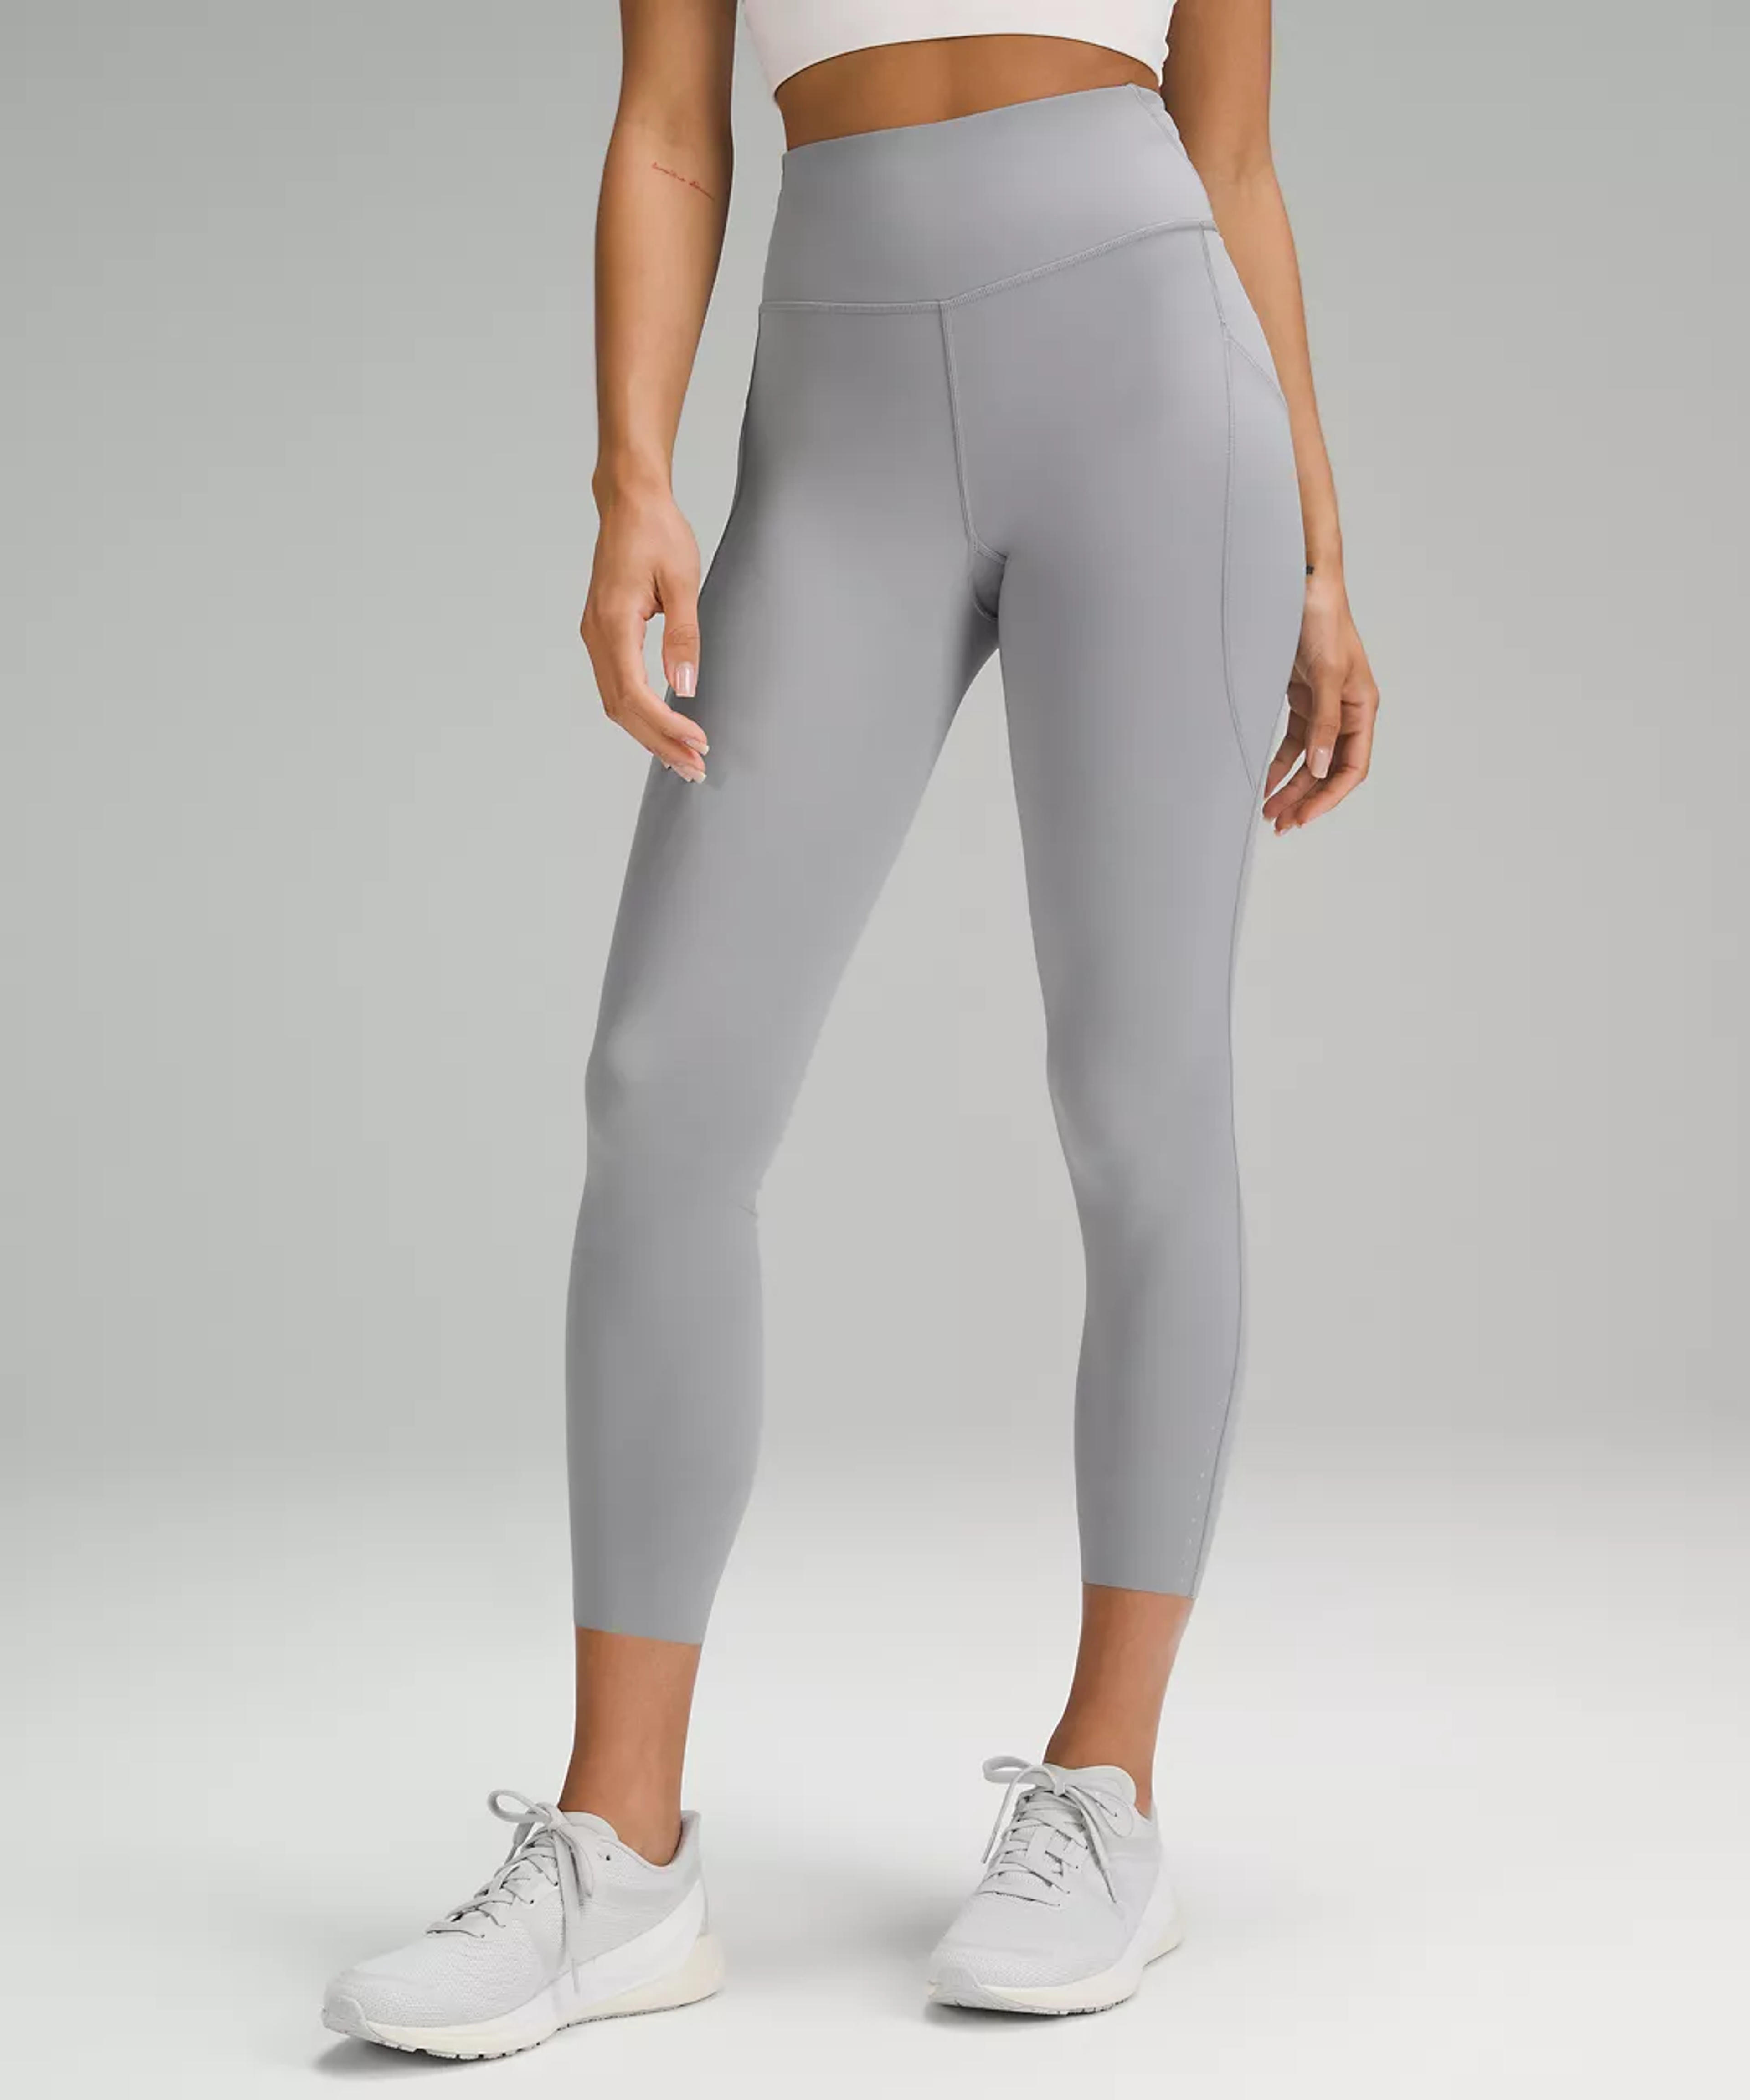 Fast and Free High-Rise Tight 25” Pockets *Updated | Women's Leggings/Tights | lululemon